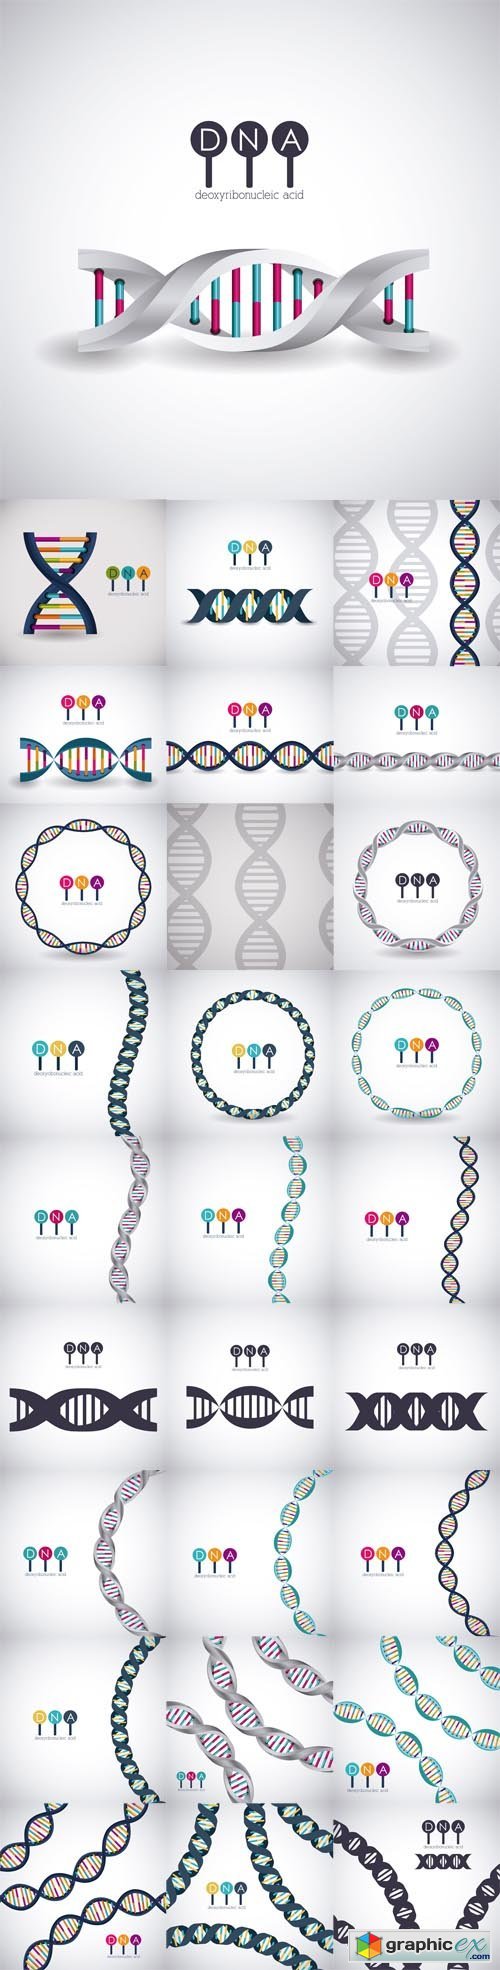 Dna structure chromosome icon. Science molecule genetic and biology theme